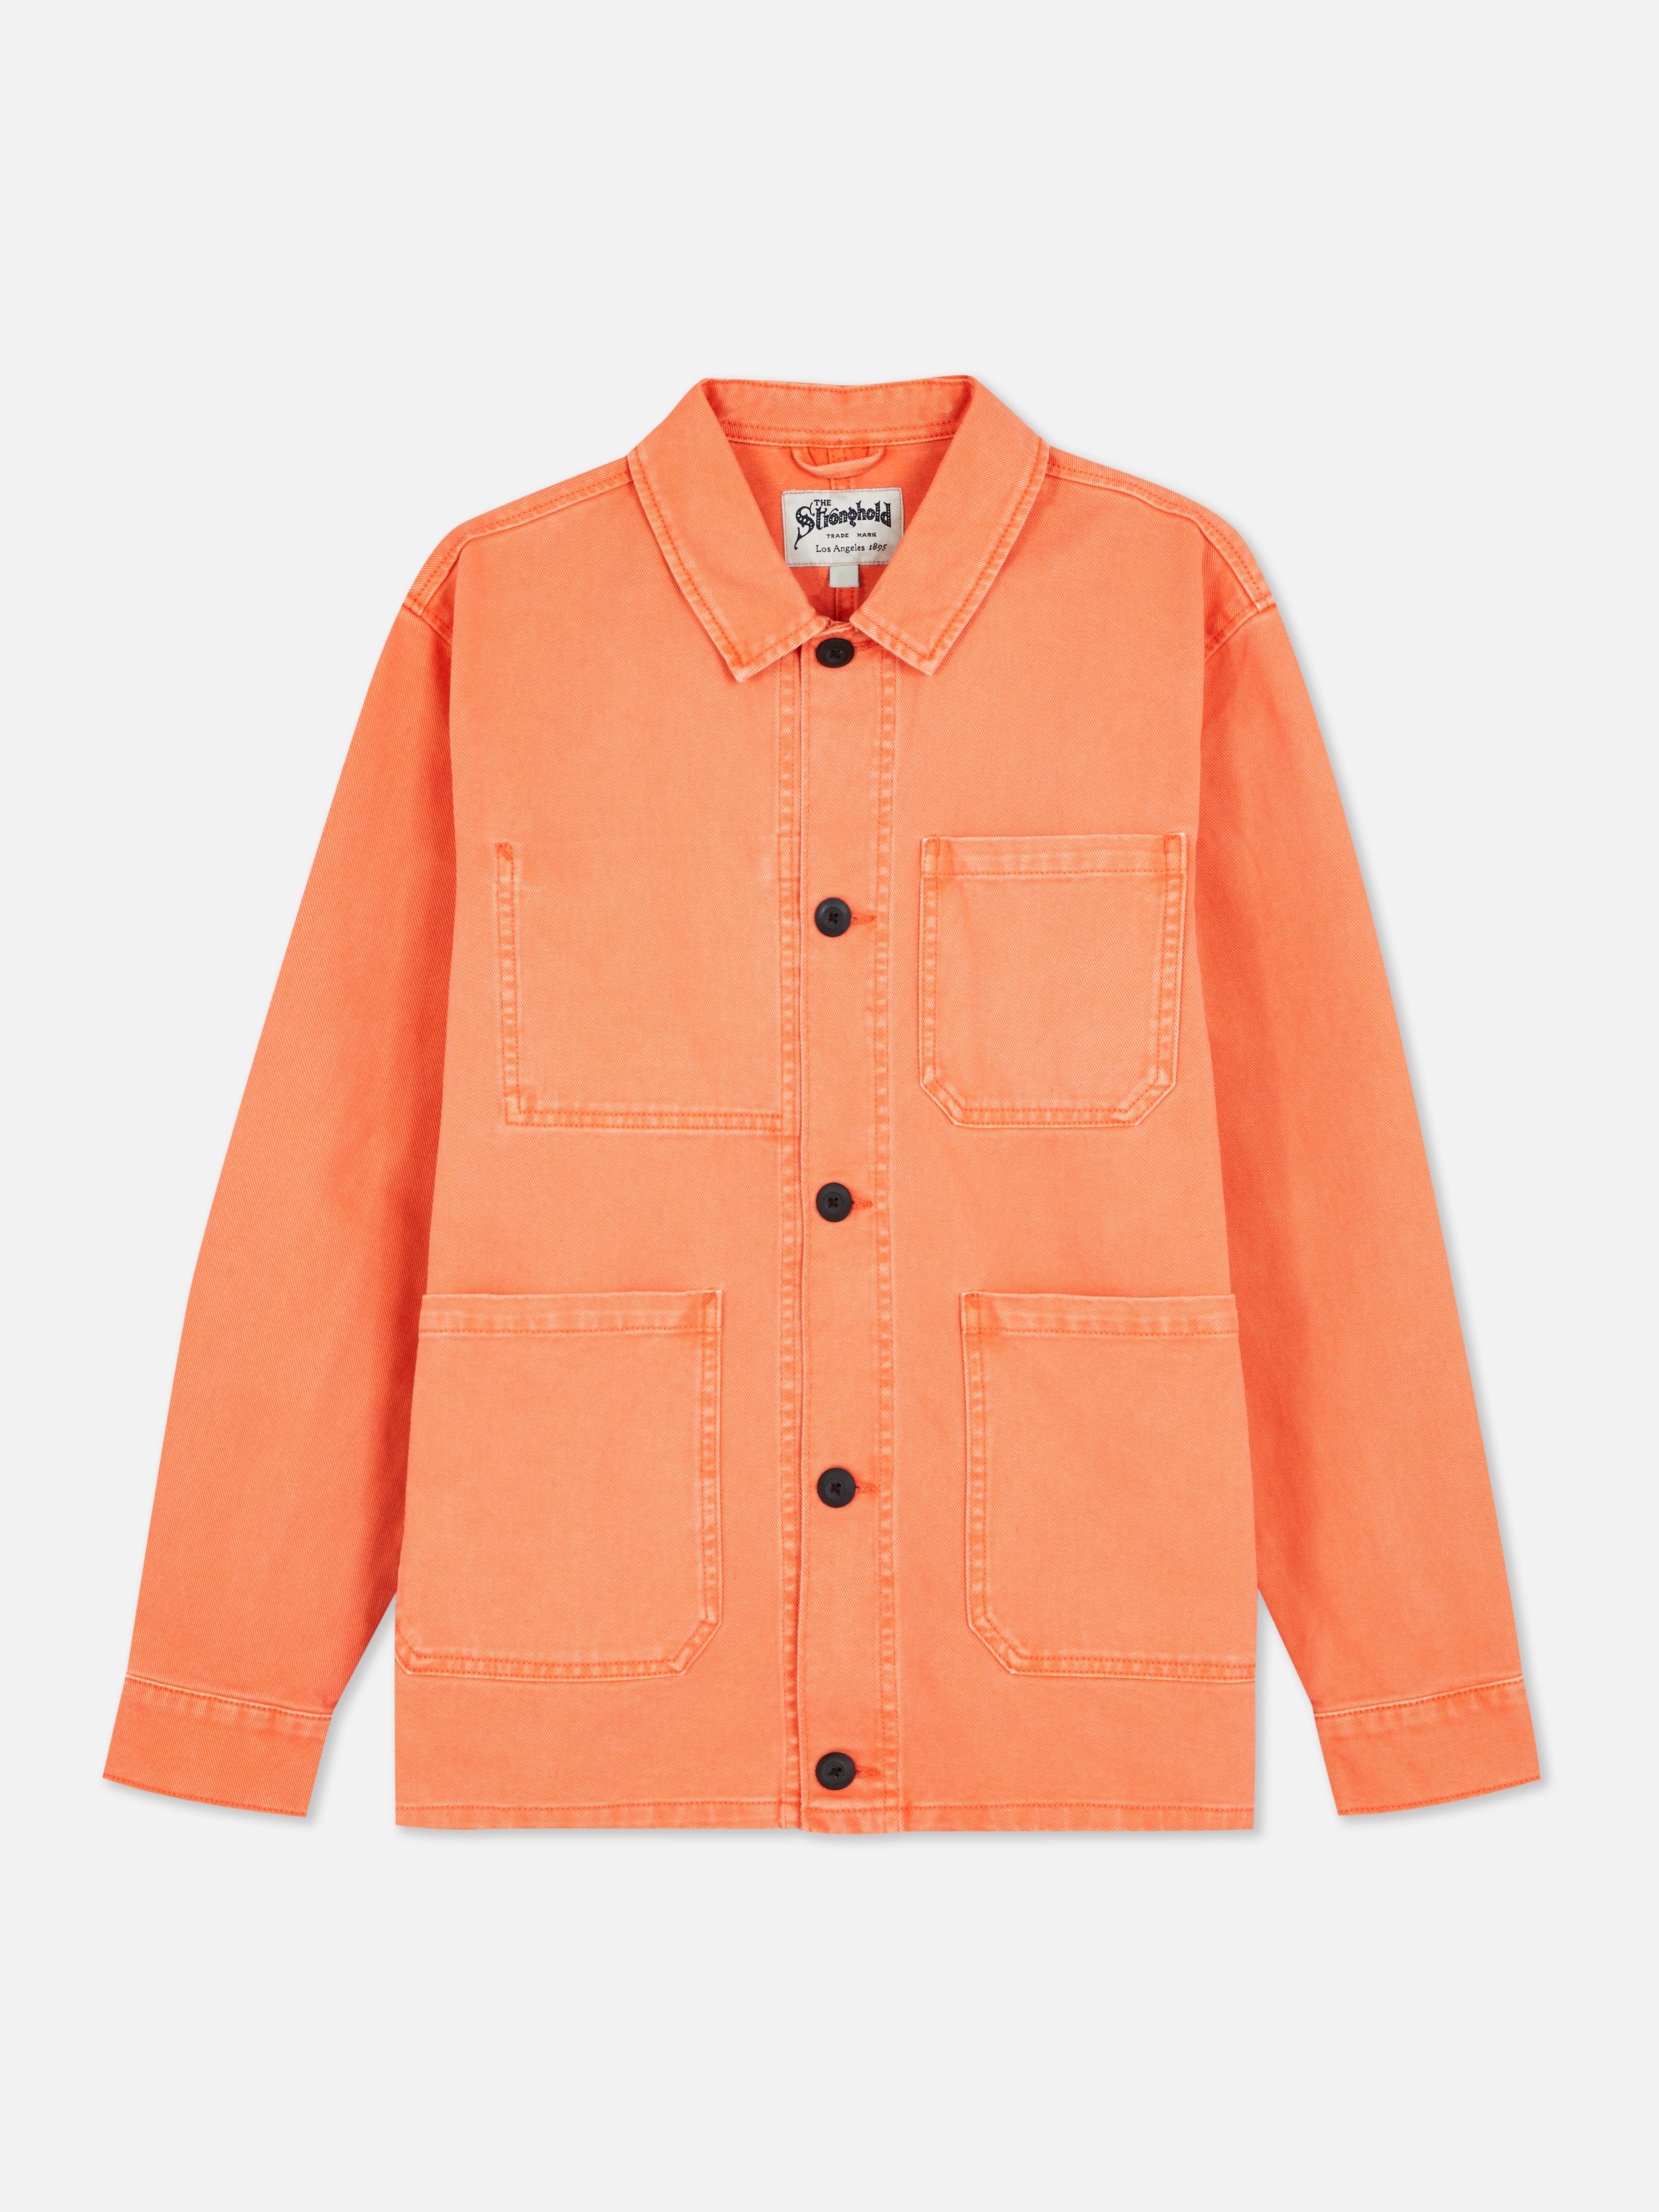 The Stronghold Washed Overshirt